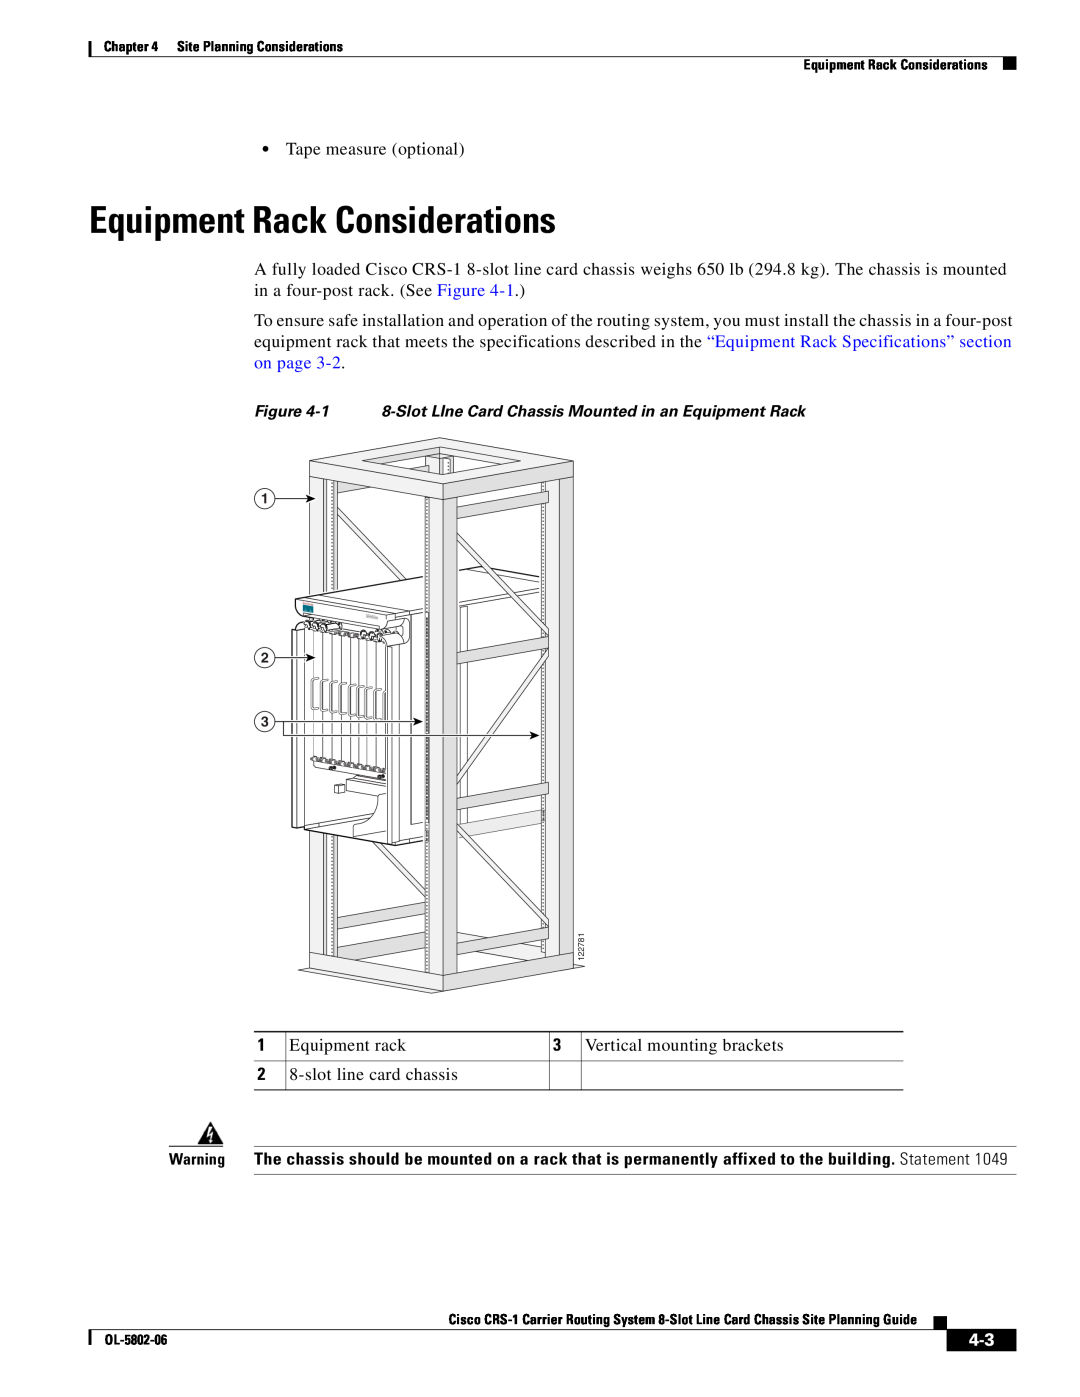 Cisco Systems CRS-1 manual Equipment Rack Considerations, Equipment rack, Vertical mounting brackets 